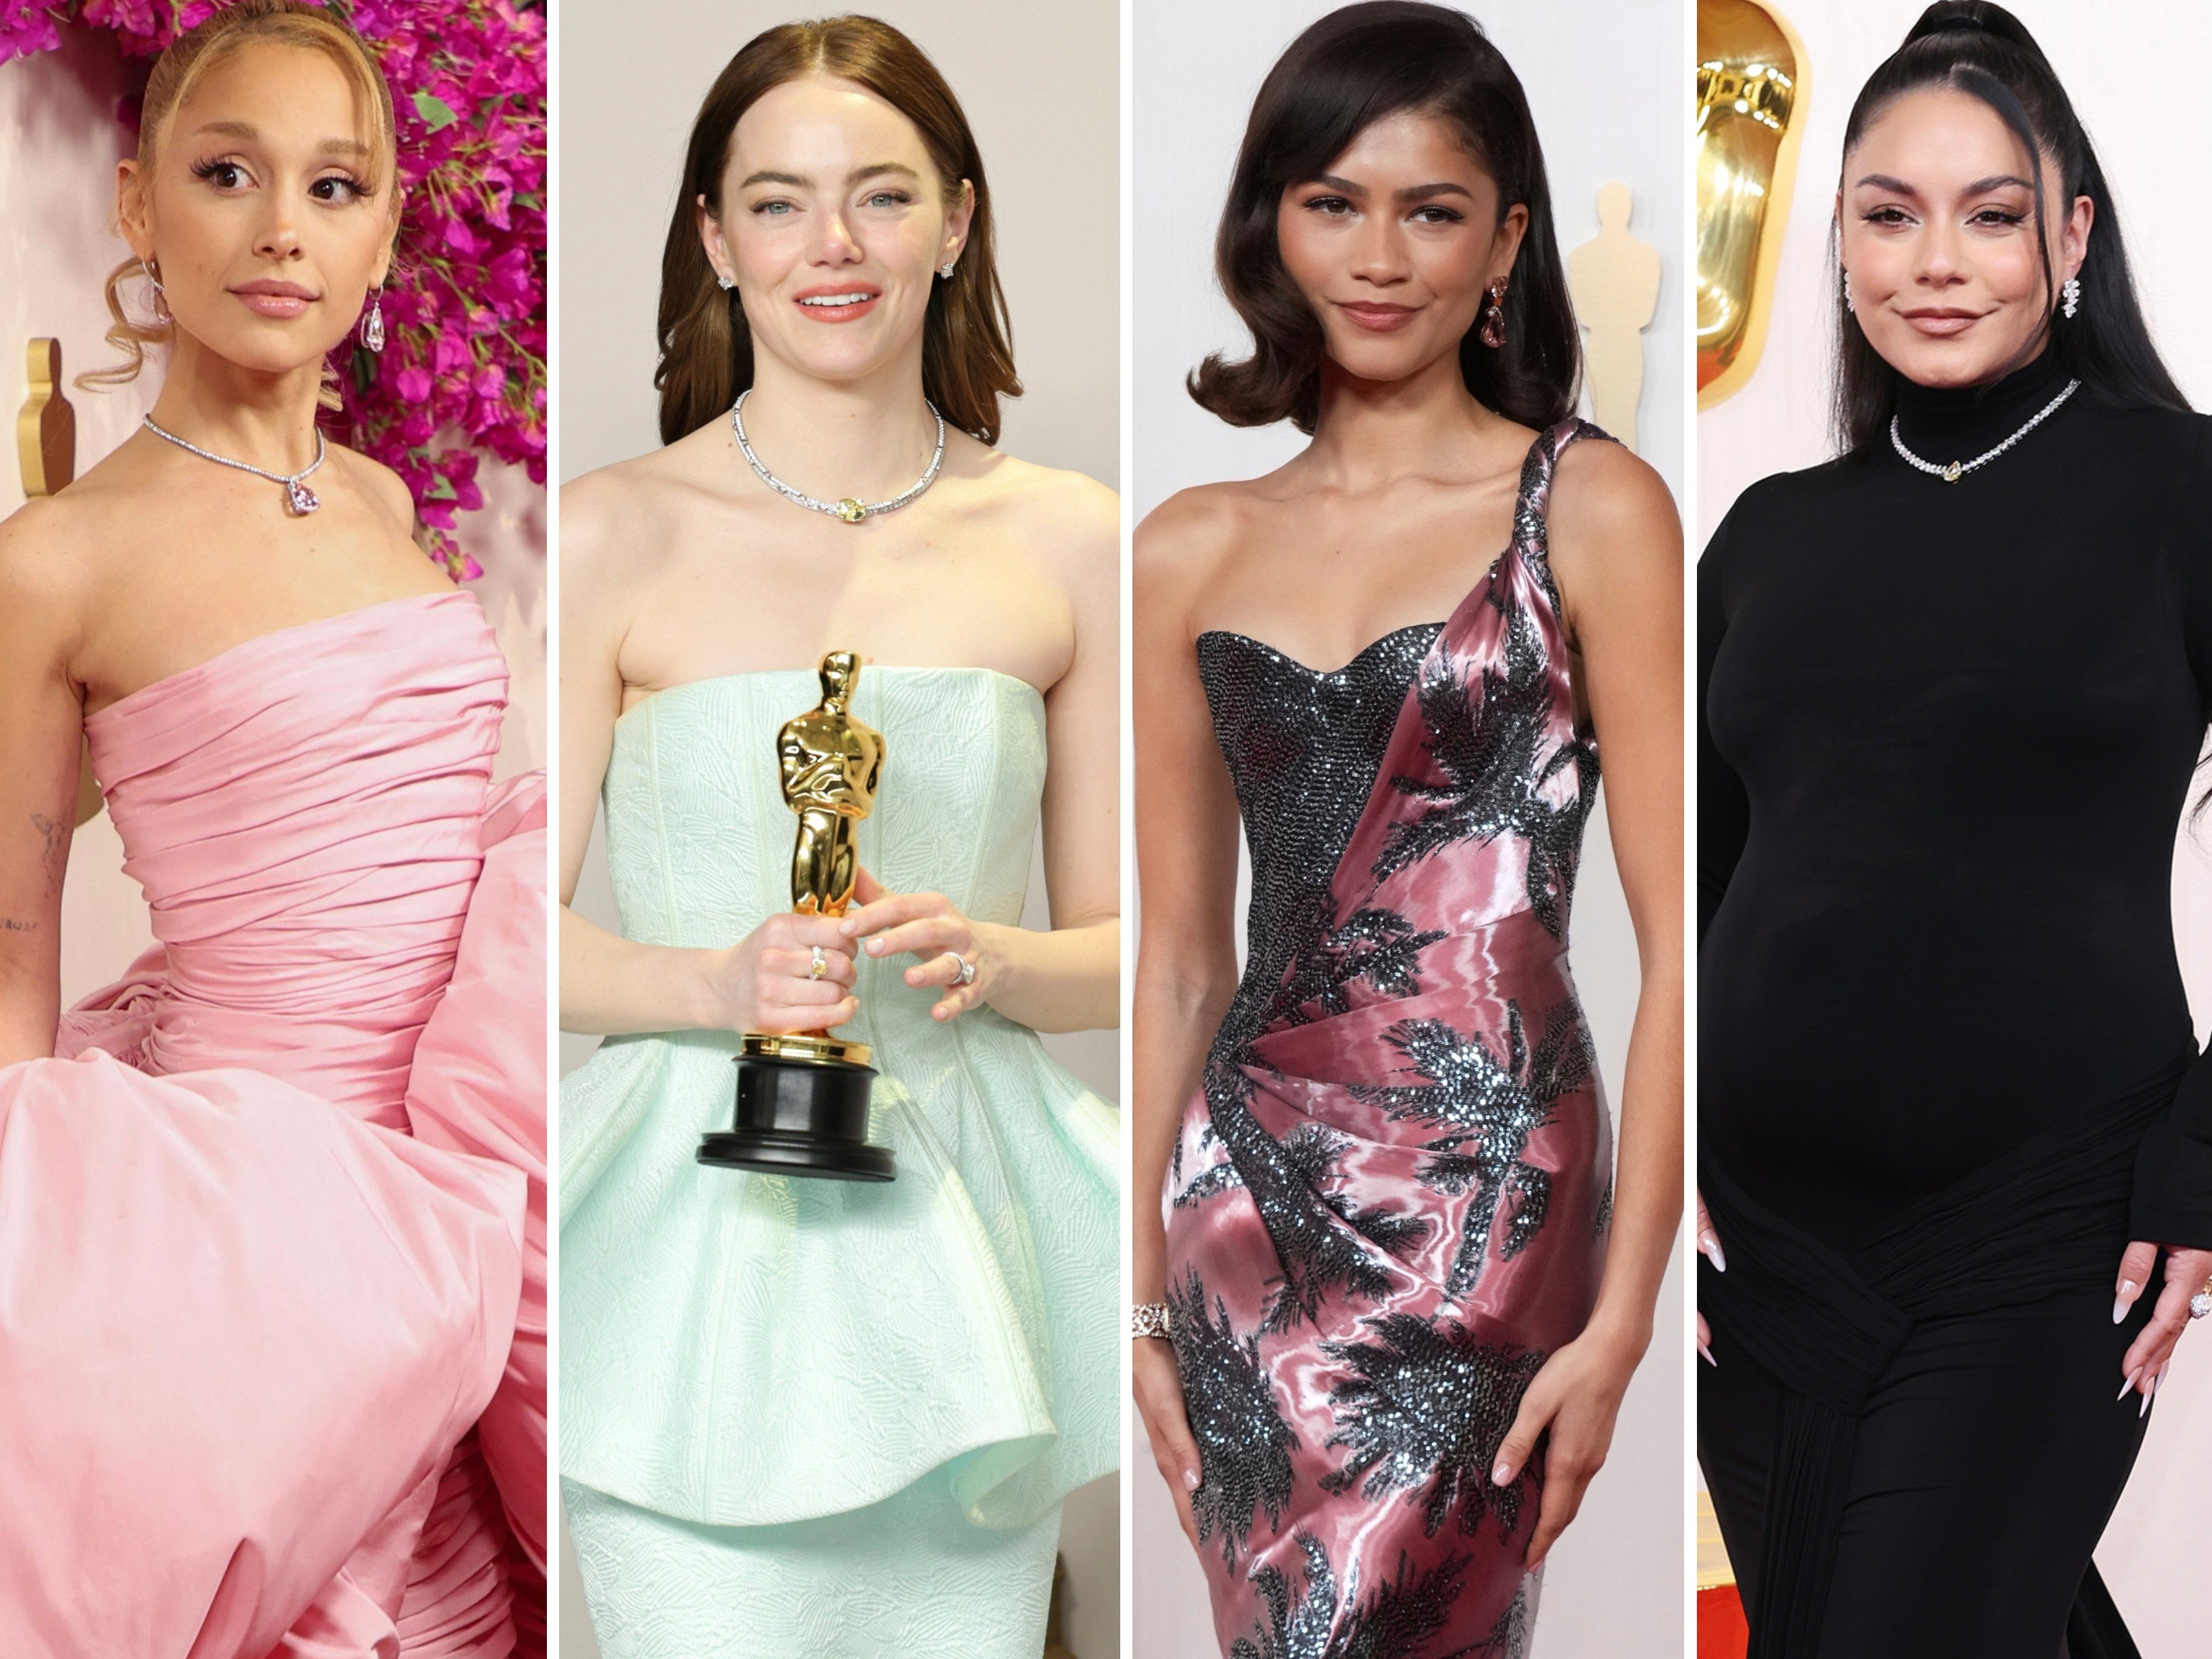 From Arianna Grande’s bubblegum pink Giambattista Valli gown to Emma Stone’s sleek pastel number, Zendaya’s Armani Prive dress and Vanessa Hudgens’ baby bump reveal, the 96th Academy Awards were bursting with iconic fashion moments. Photos: EPA, AFP, AP, TNS